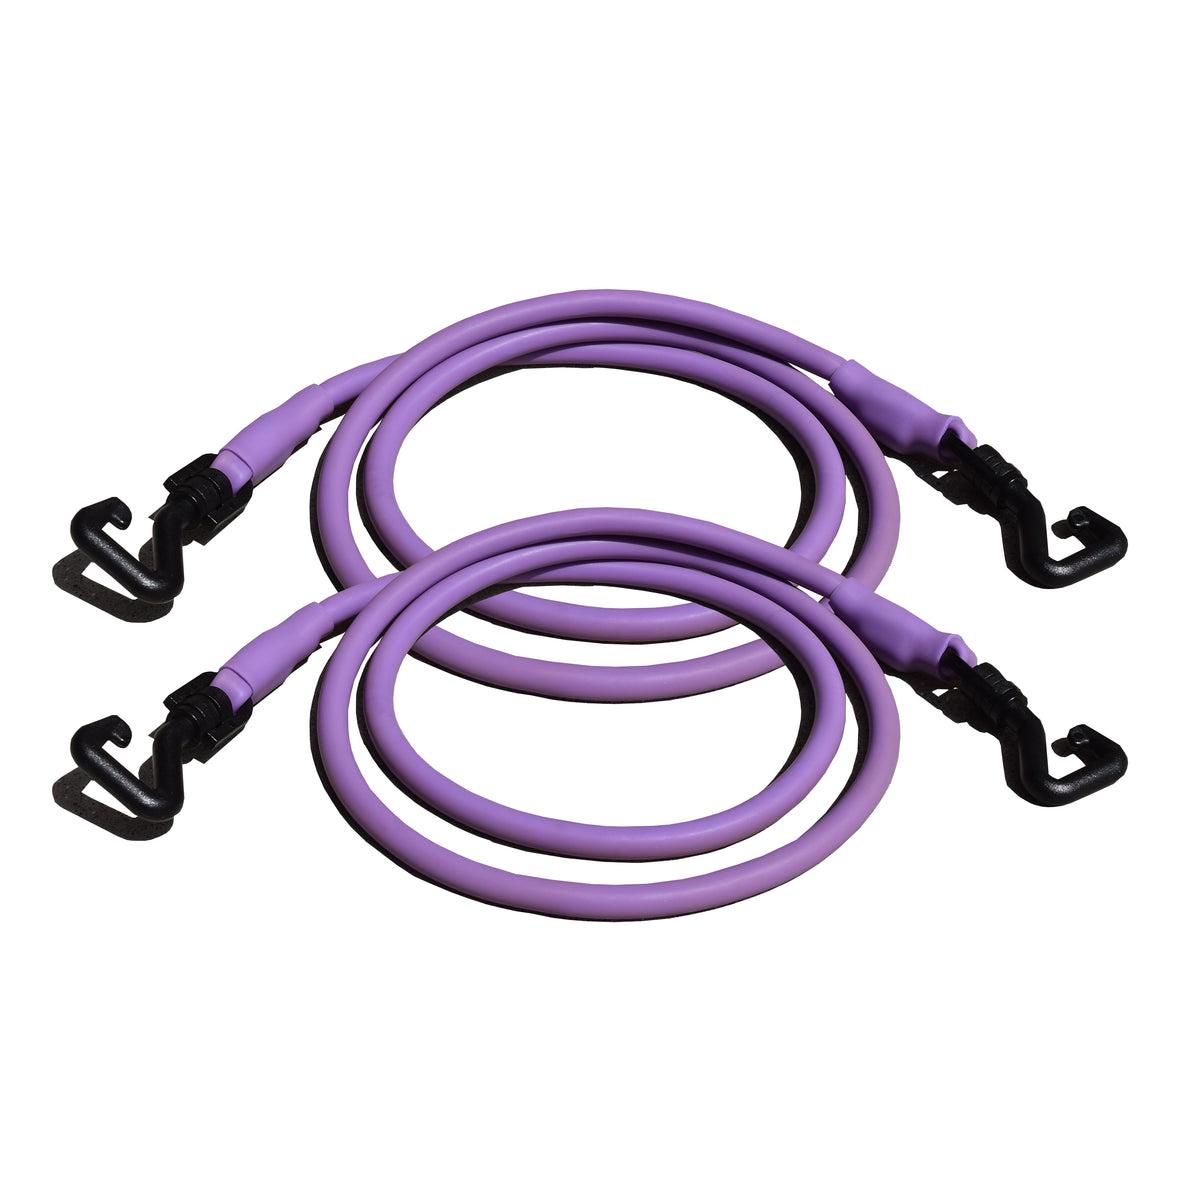 PSPro™ Kit - Pilates in a bag that goes where you go - Purple Bands set of 2